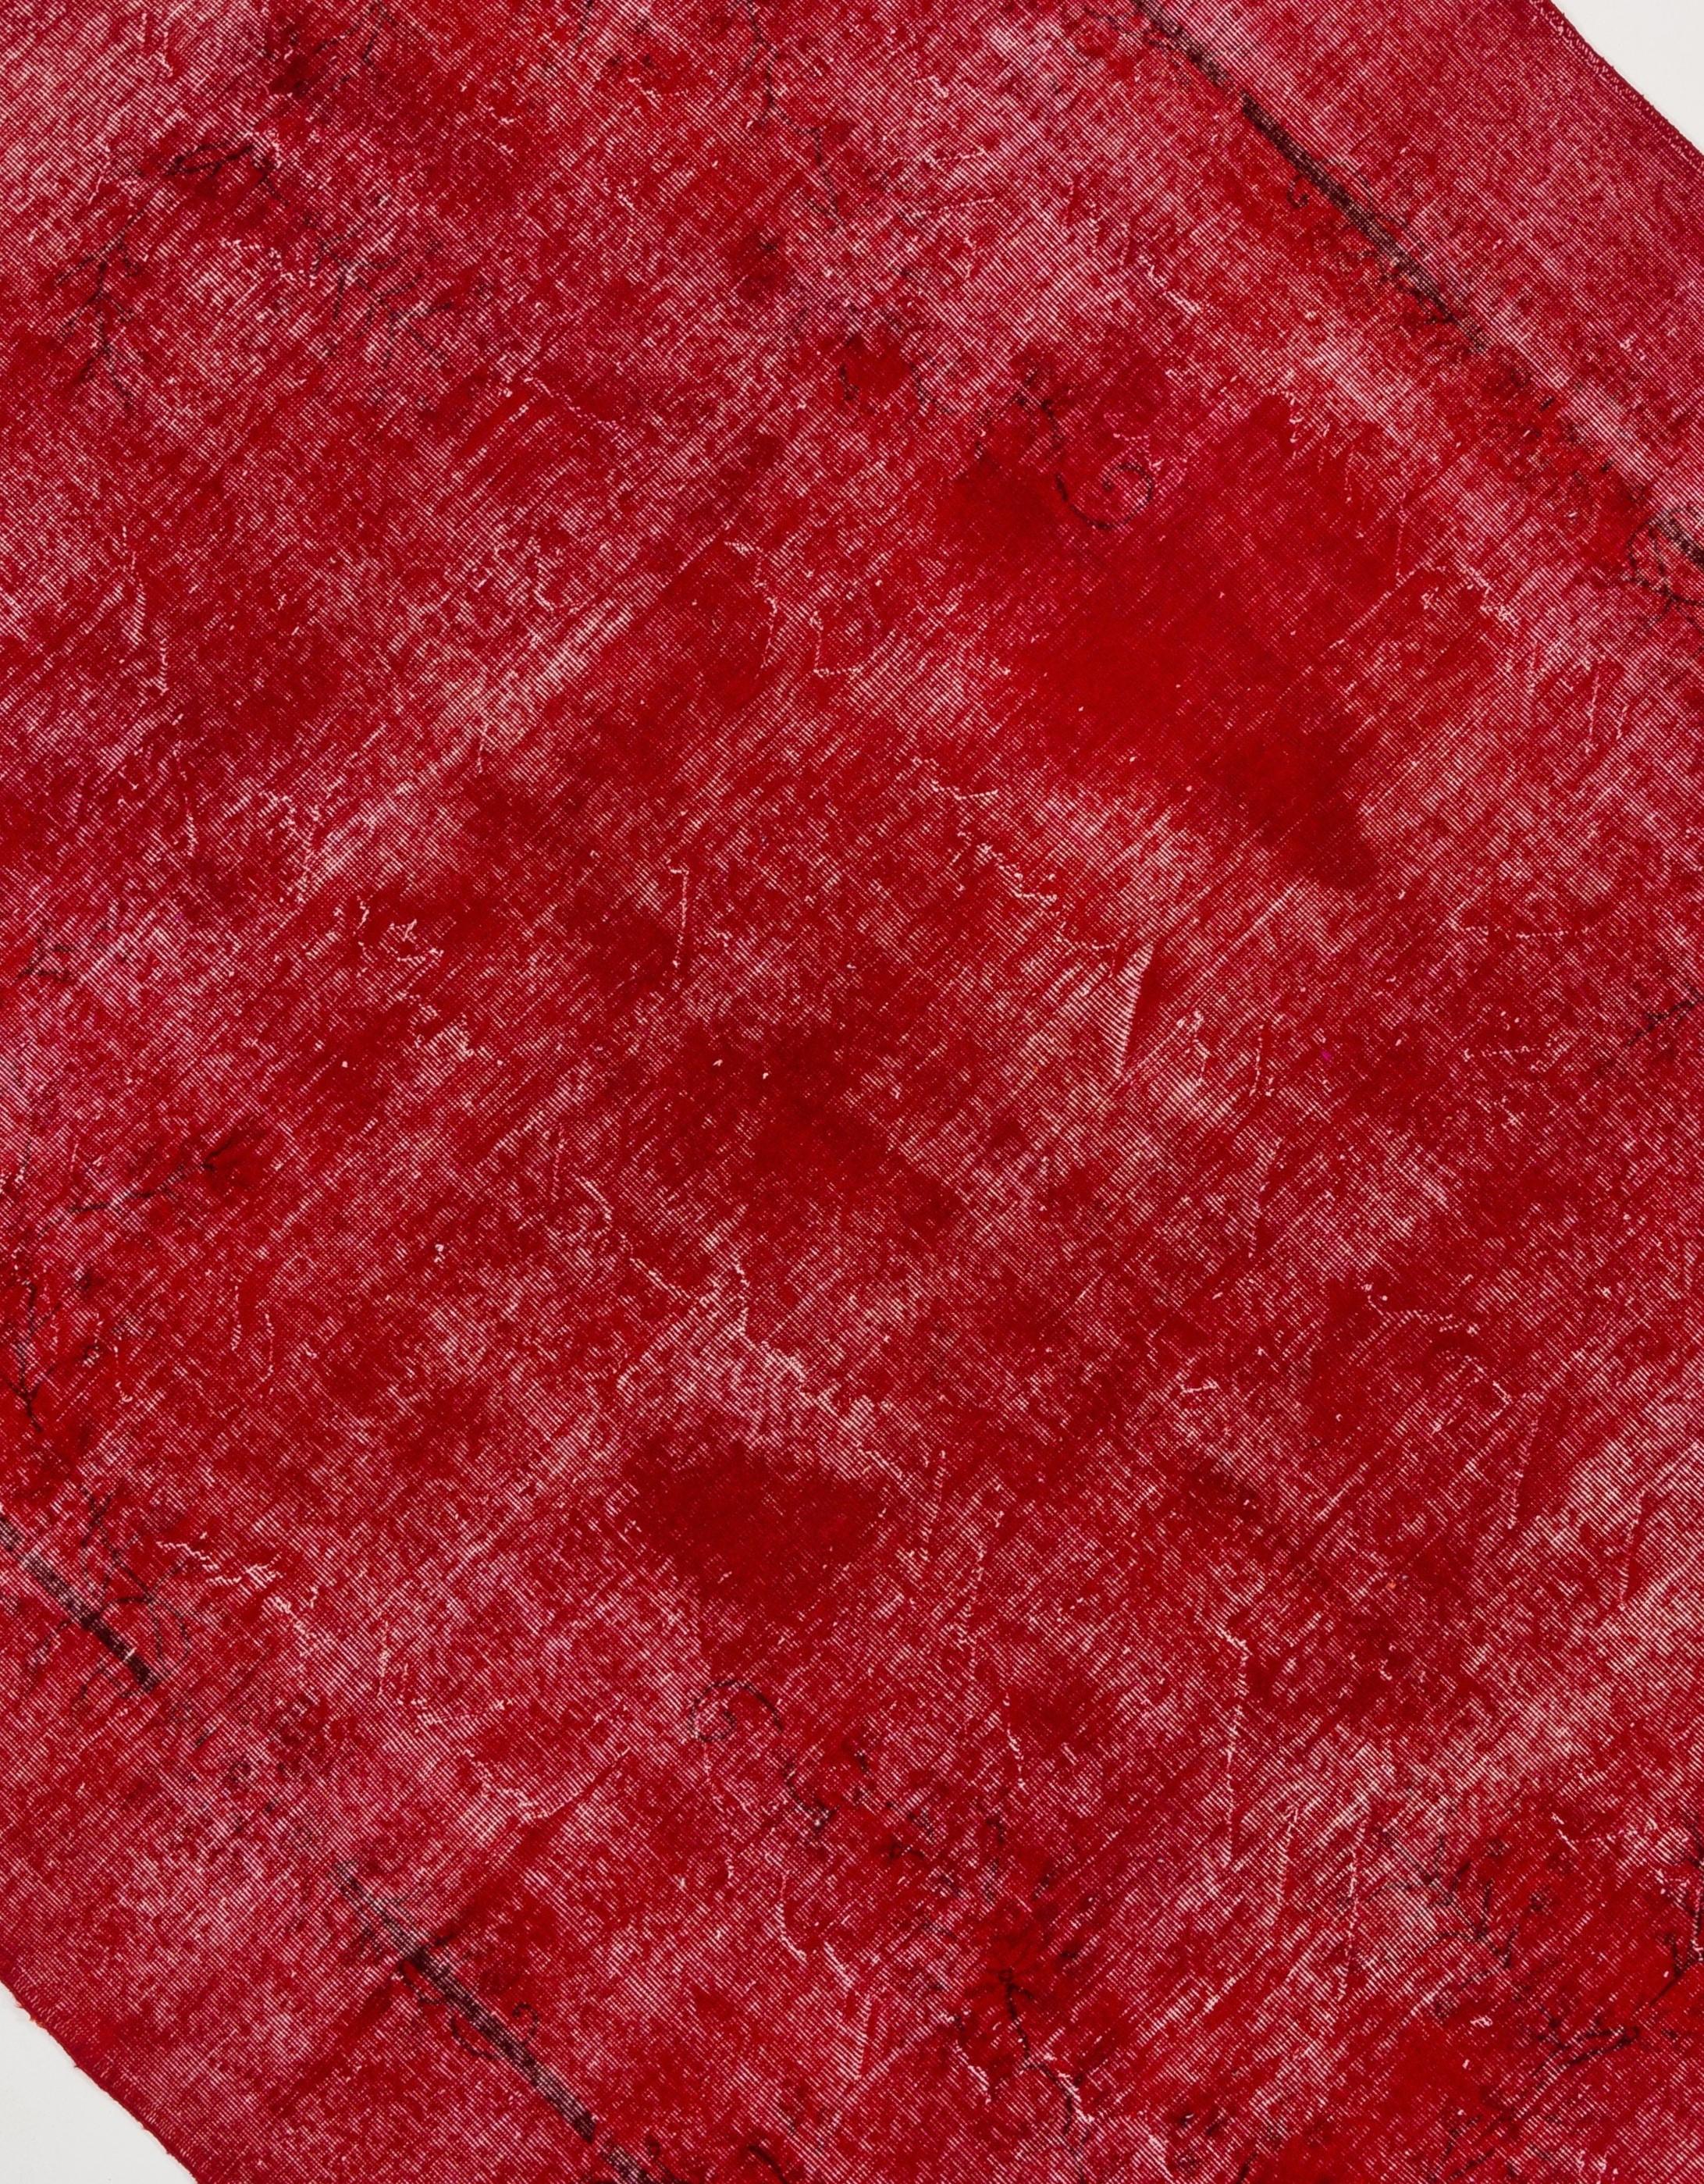 Turkish 8.7x11 Ft Solid Red Color Vintage Rug Overdyed in Red. Great 4 Modern Interiors